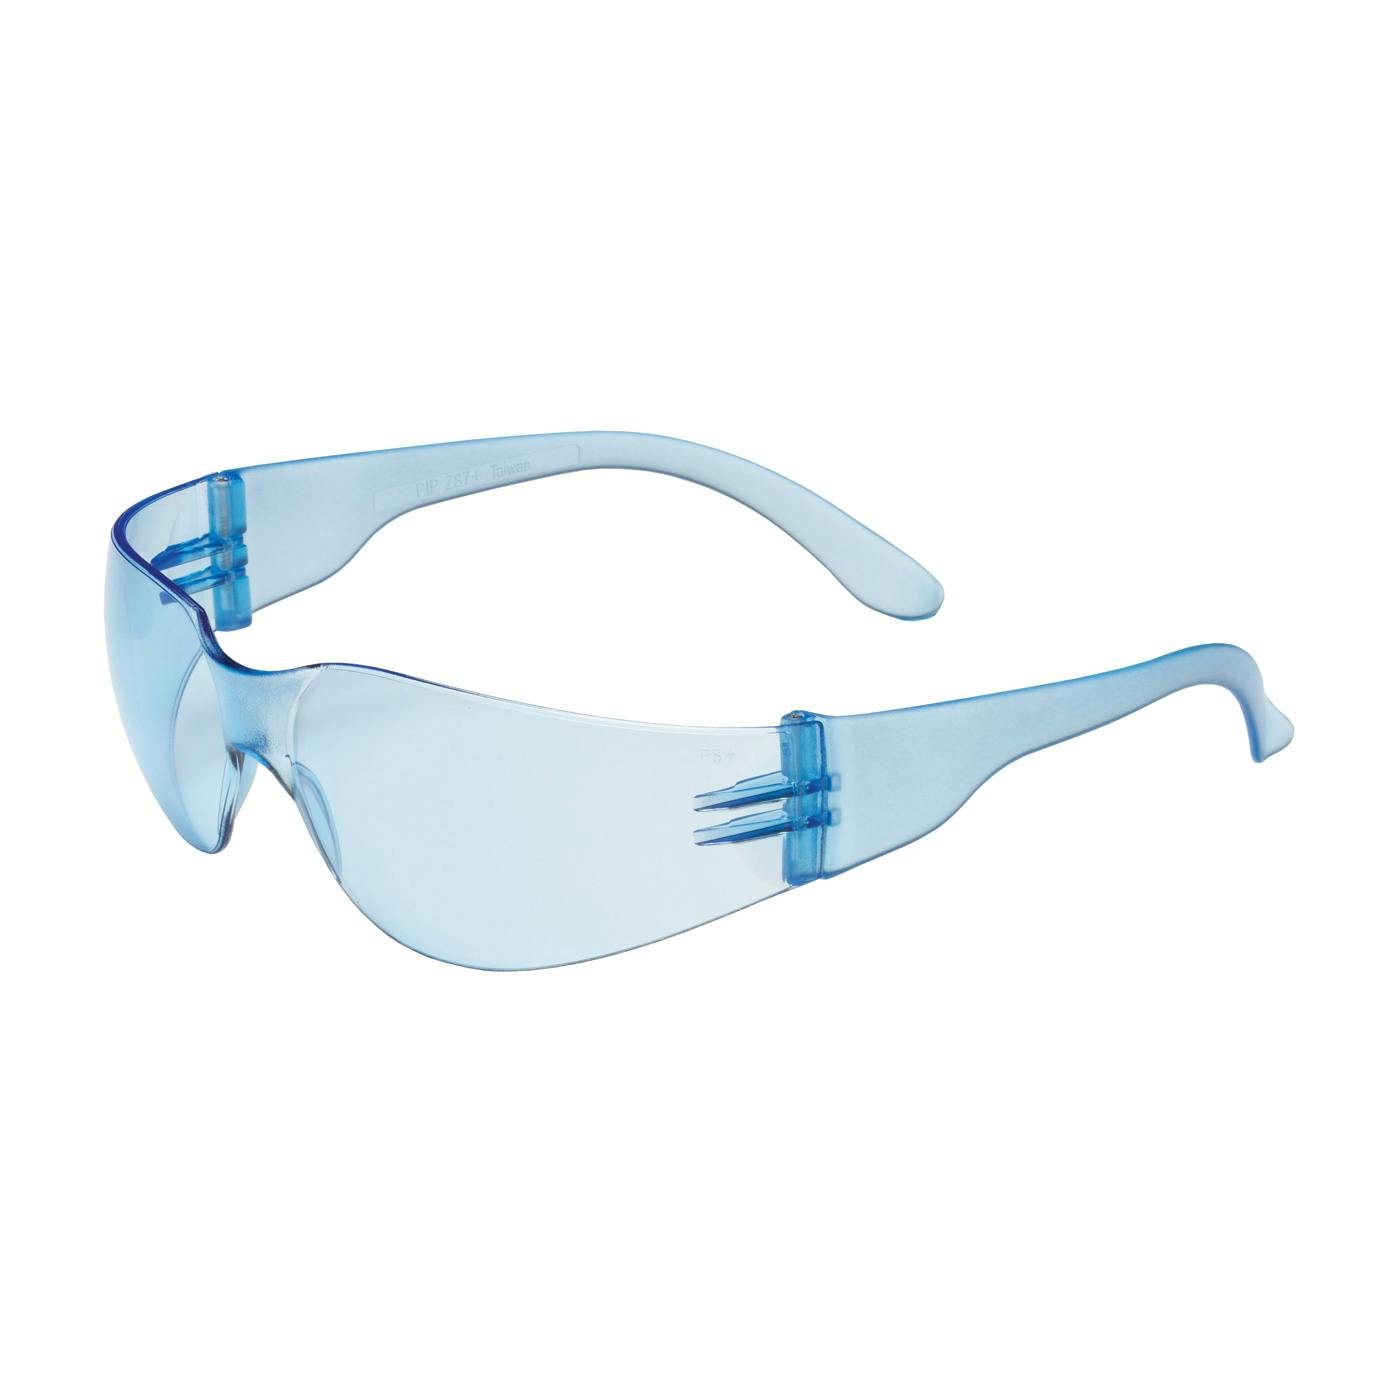 Rimless Safety Glasses with Light Blue Temple, Light Blue Lens and Anti-Scratch Coating, Light Blue (250-01-5503) - OS_0